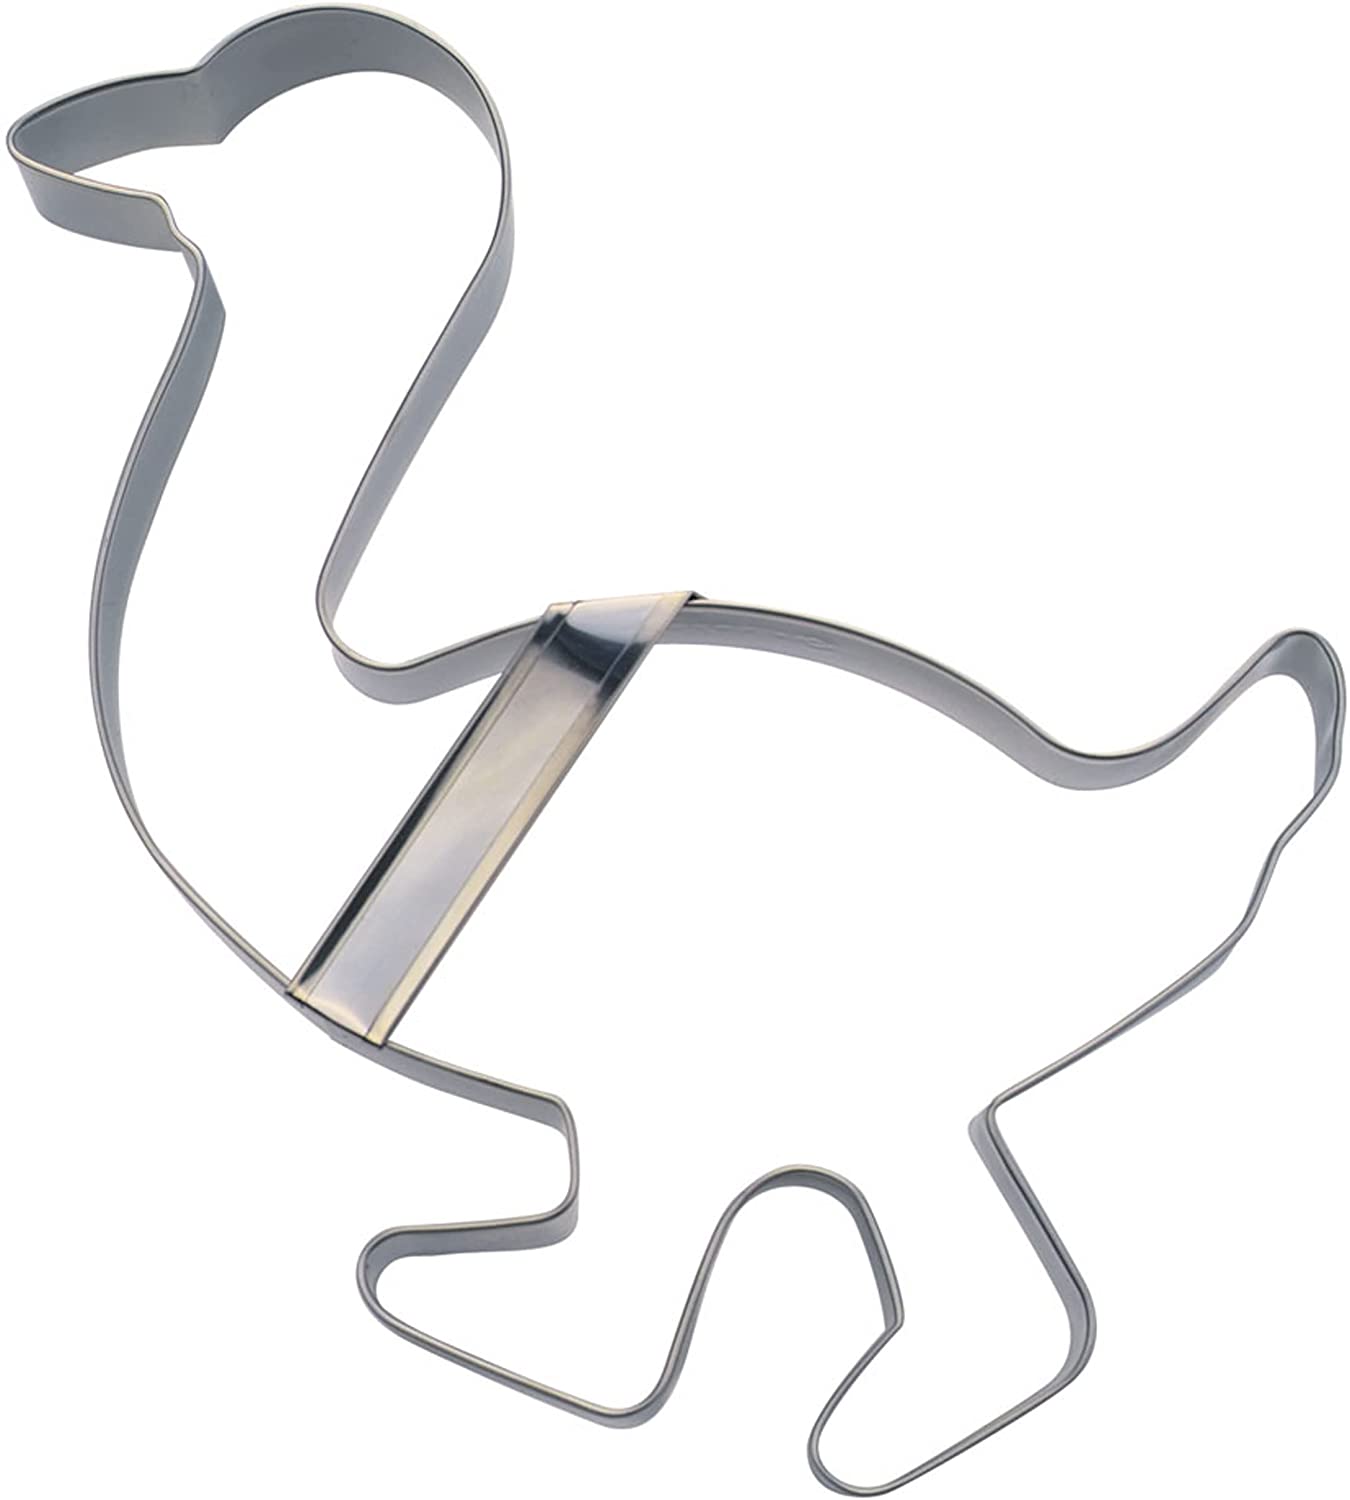 Staedter Goose Biscuit Cutter, Stainless Steel, Silver, 24 cm